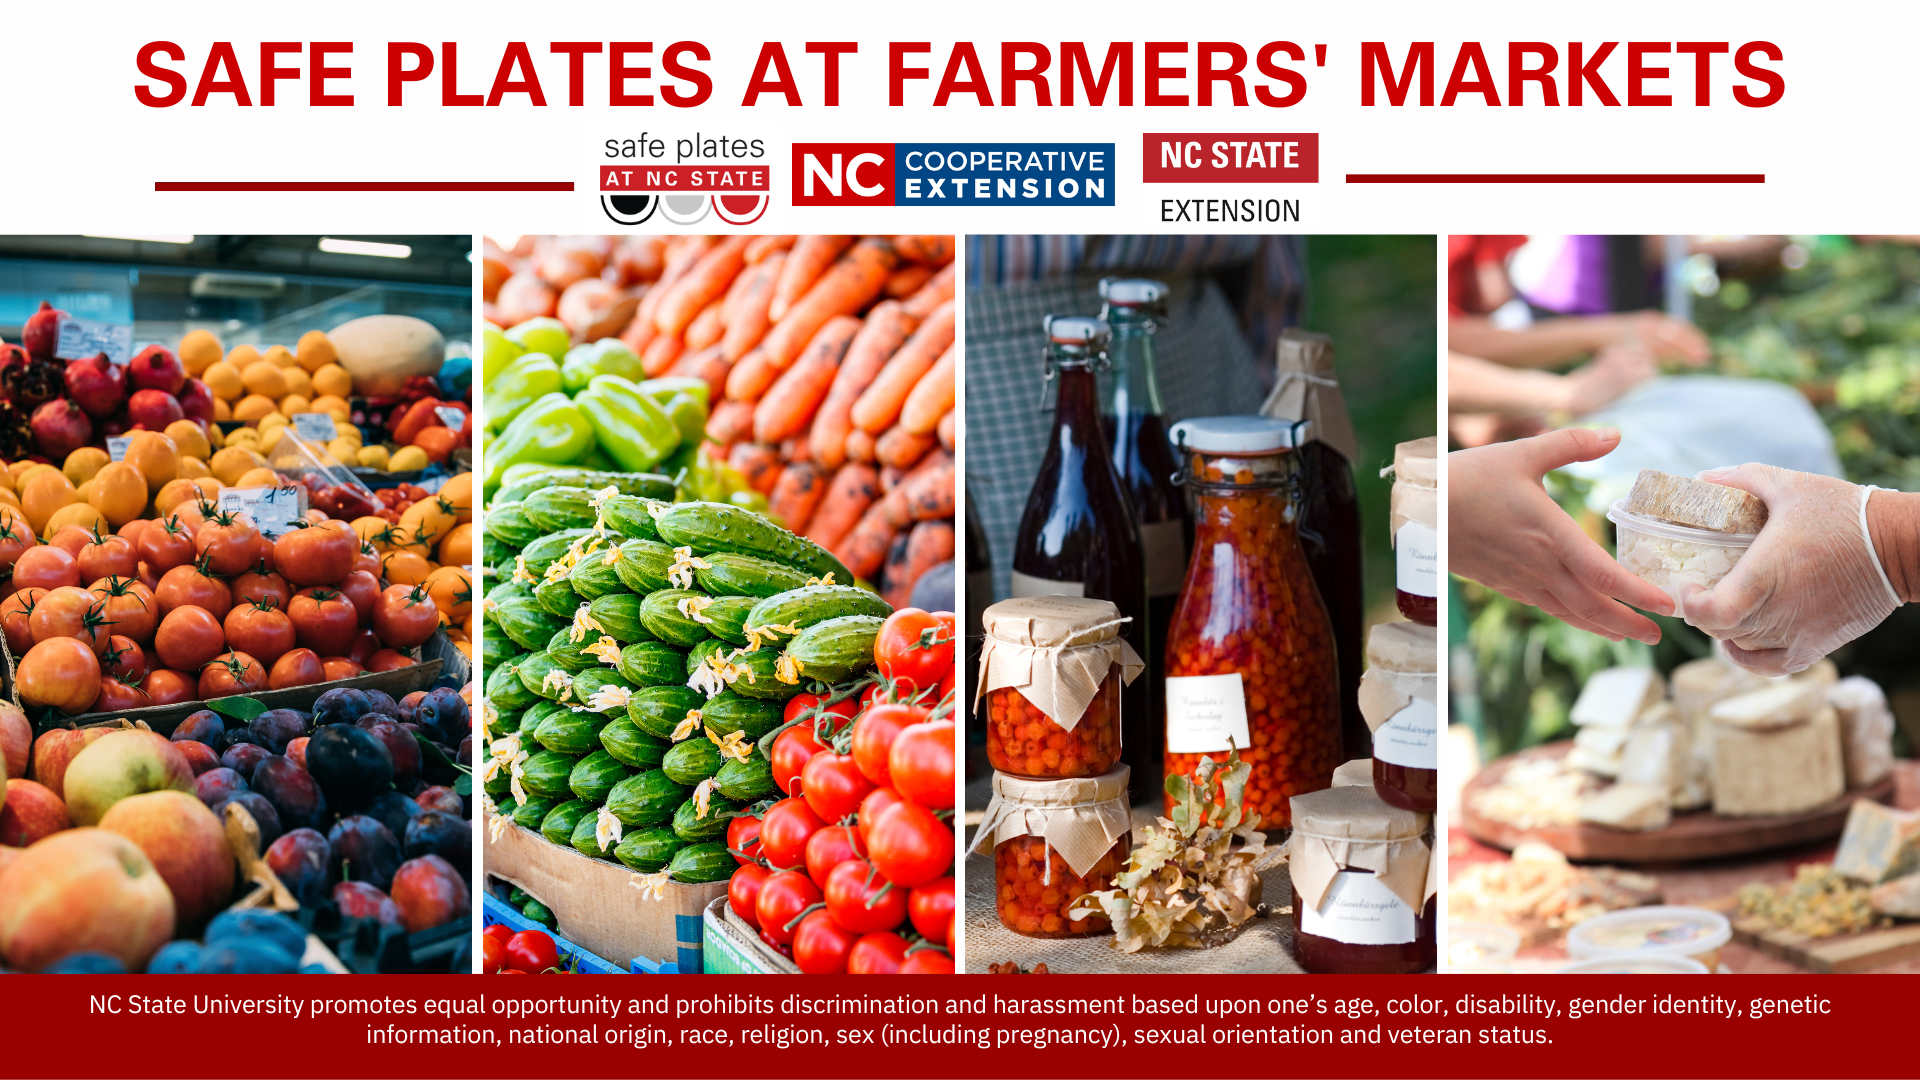 Safe Plates at Farmers Markets